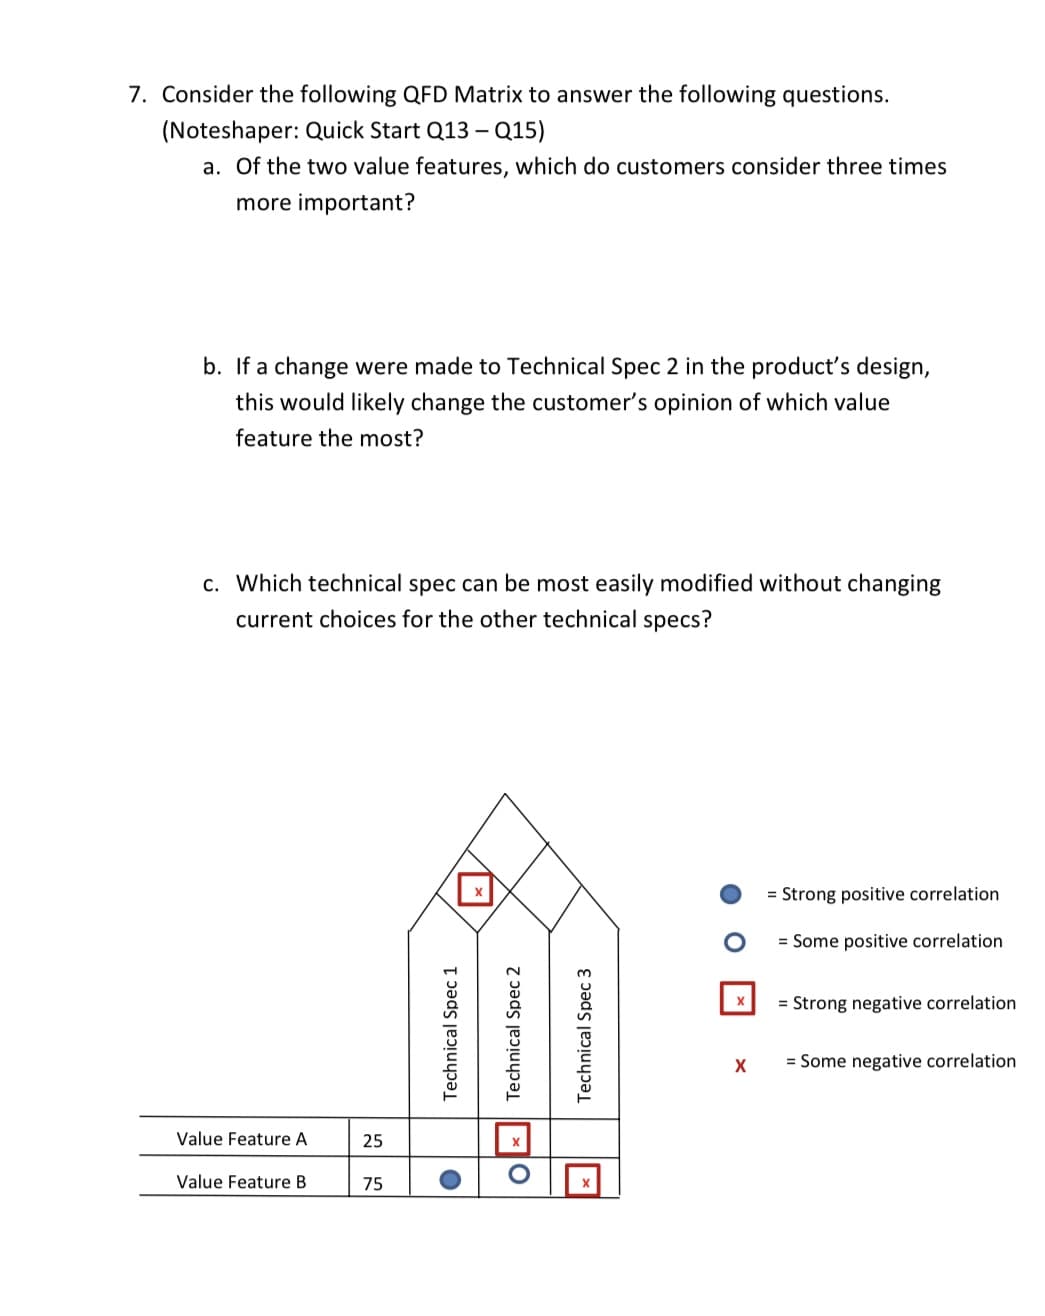 7. Consider the following QFD Matrix to answer the following questions.
(Noteshaper: Quick Start Q13 – Q15)
a. Of the two value features, which do customers consider three times
more important?
b. If a change were made to Technical Spec 2 in the product's design,
this would likely change the customer's opinion of which value
feature the most?
c. Which technical spec can be most easily modified without changing
current choices for the other technical specs?
= Strong positive correlation
= Some positive correlation
= Strong negative correlation
= Some negative correlation
Value Feature A
25
Value Feature B
75
Technical Spec 1
ox Technical Spec 2
Technical Spec 3
